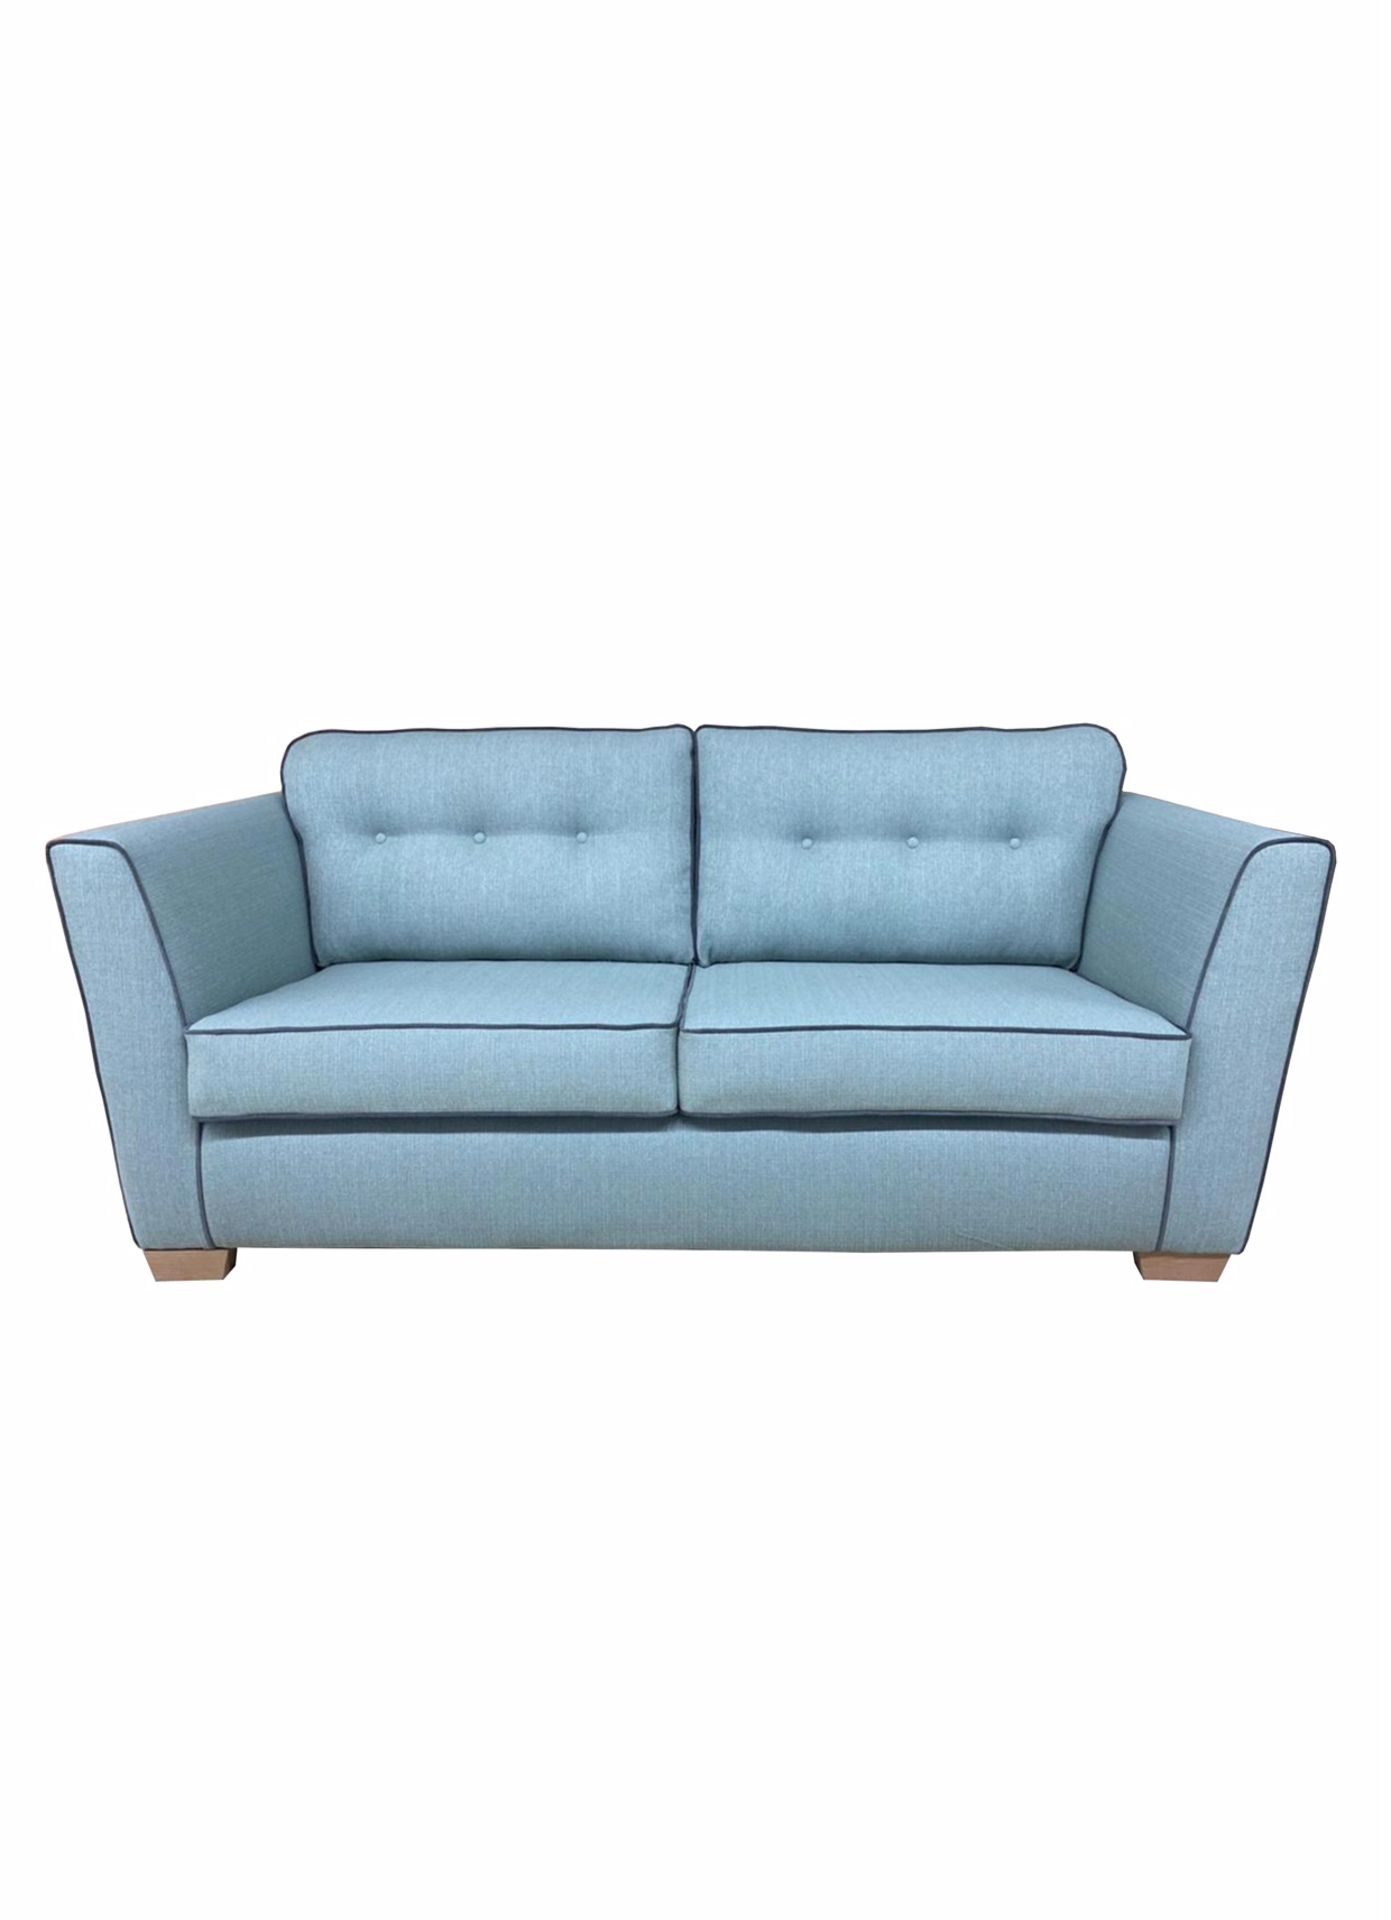 Brand new 3 seater plus 2 seater Dorset luxury fabric sofas in teal